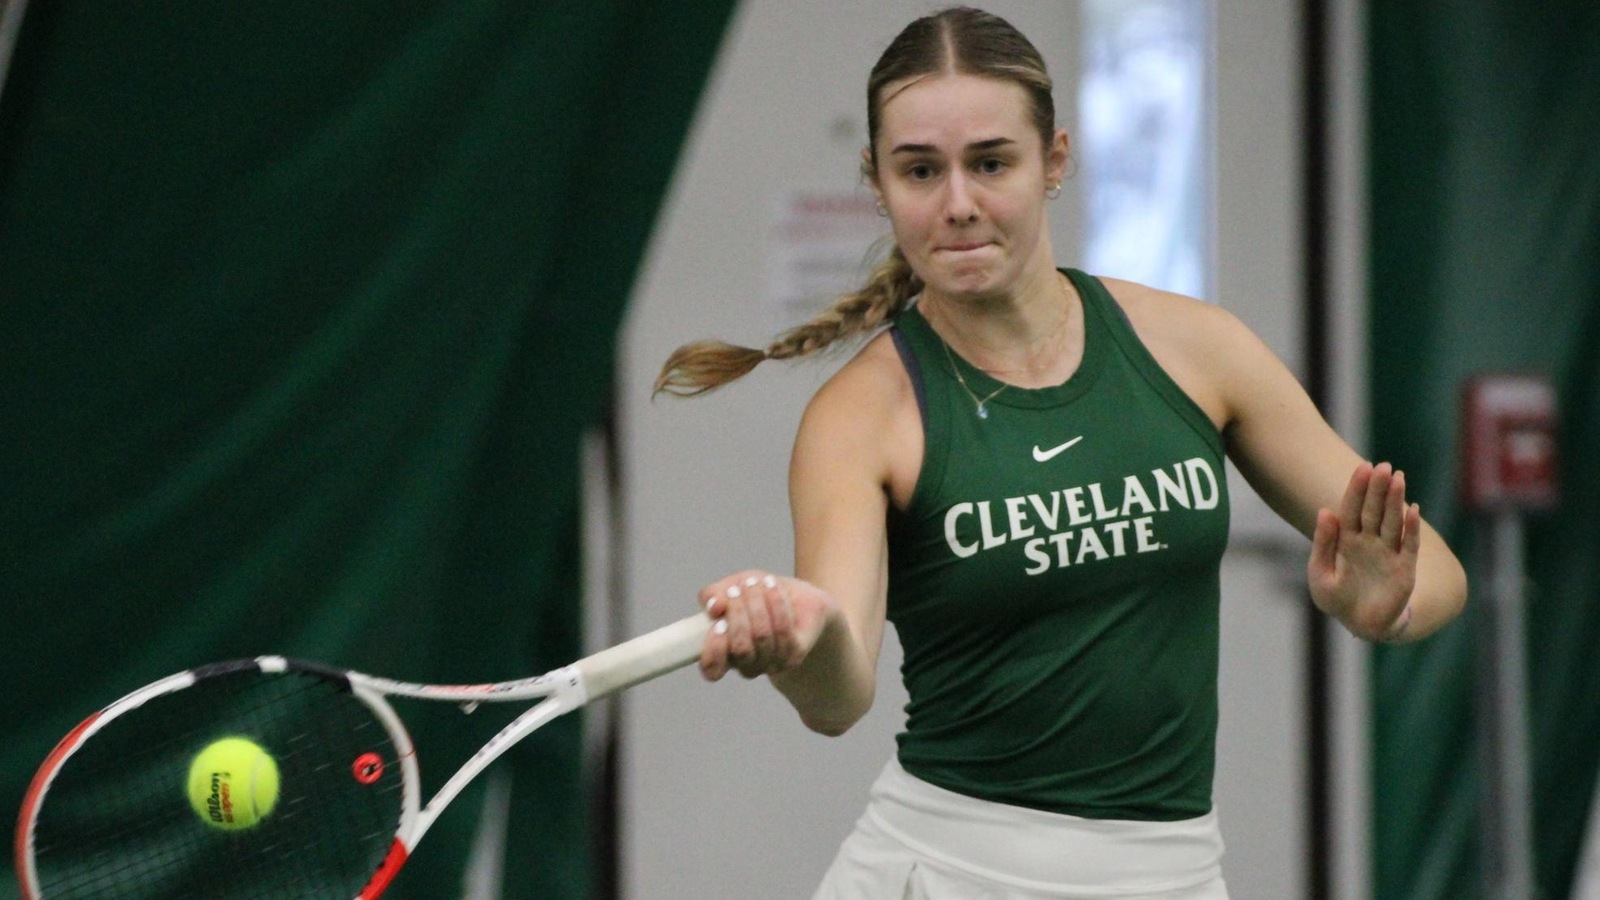 Cleveland State Women’s Tennis Earns 6-1 Victory Over Dayton